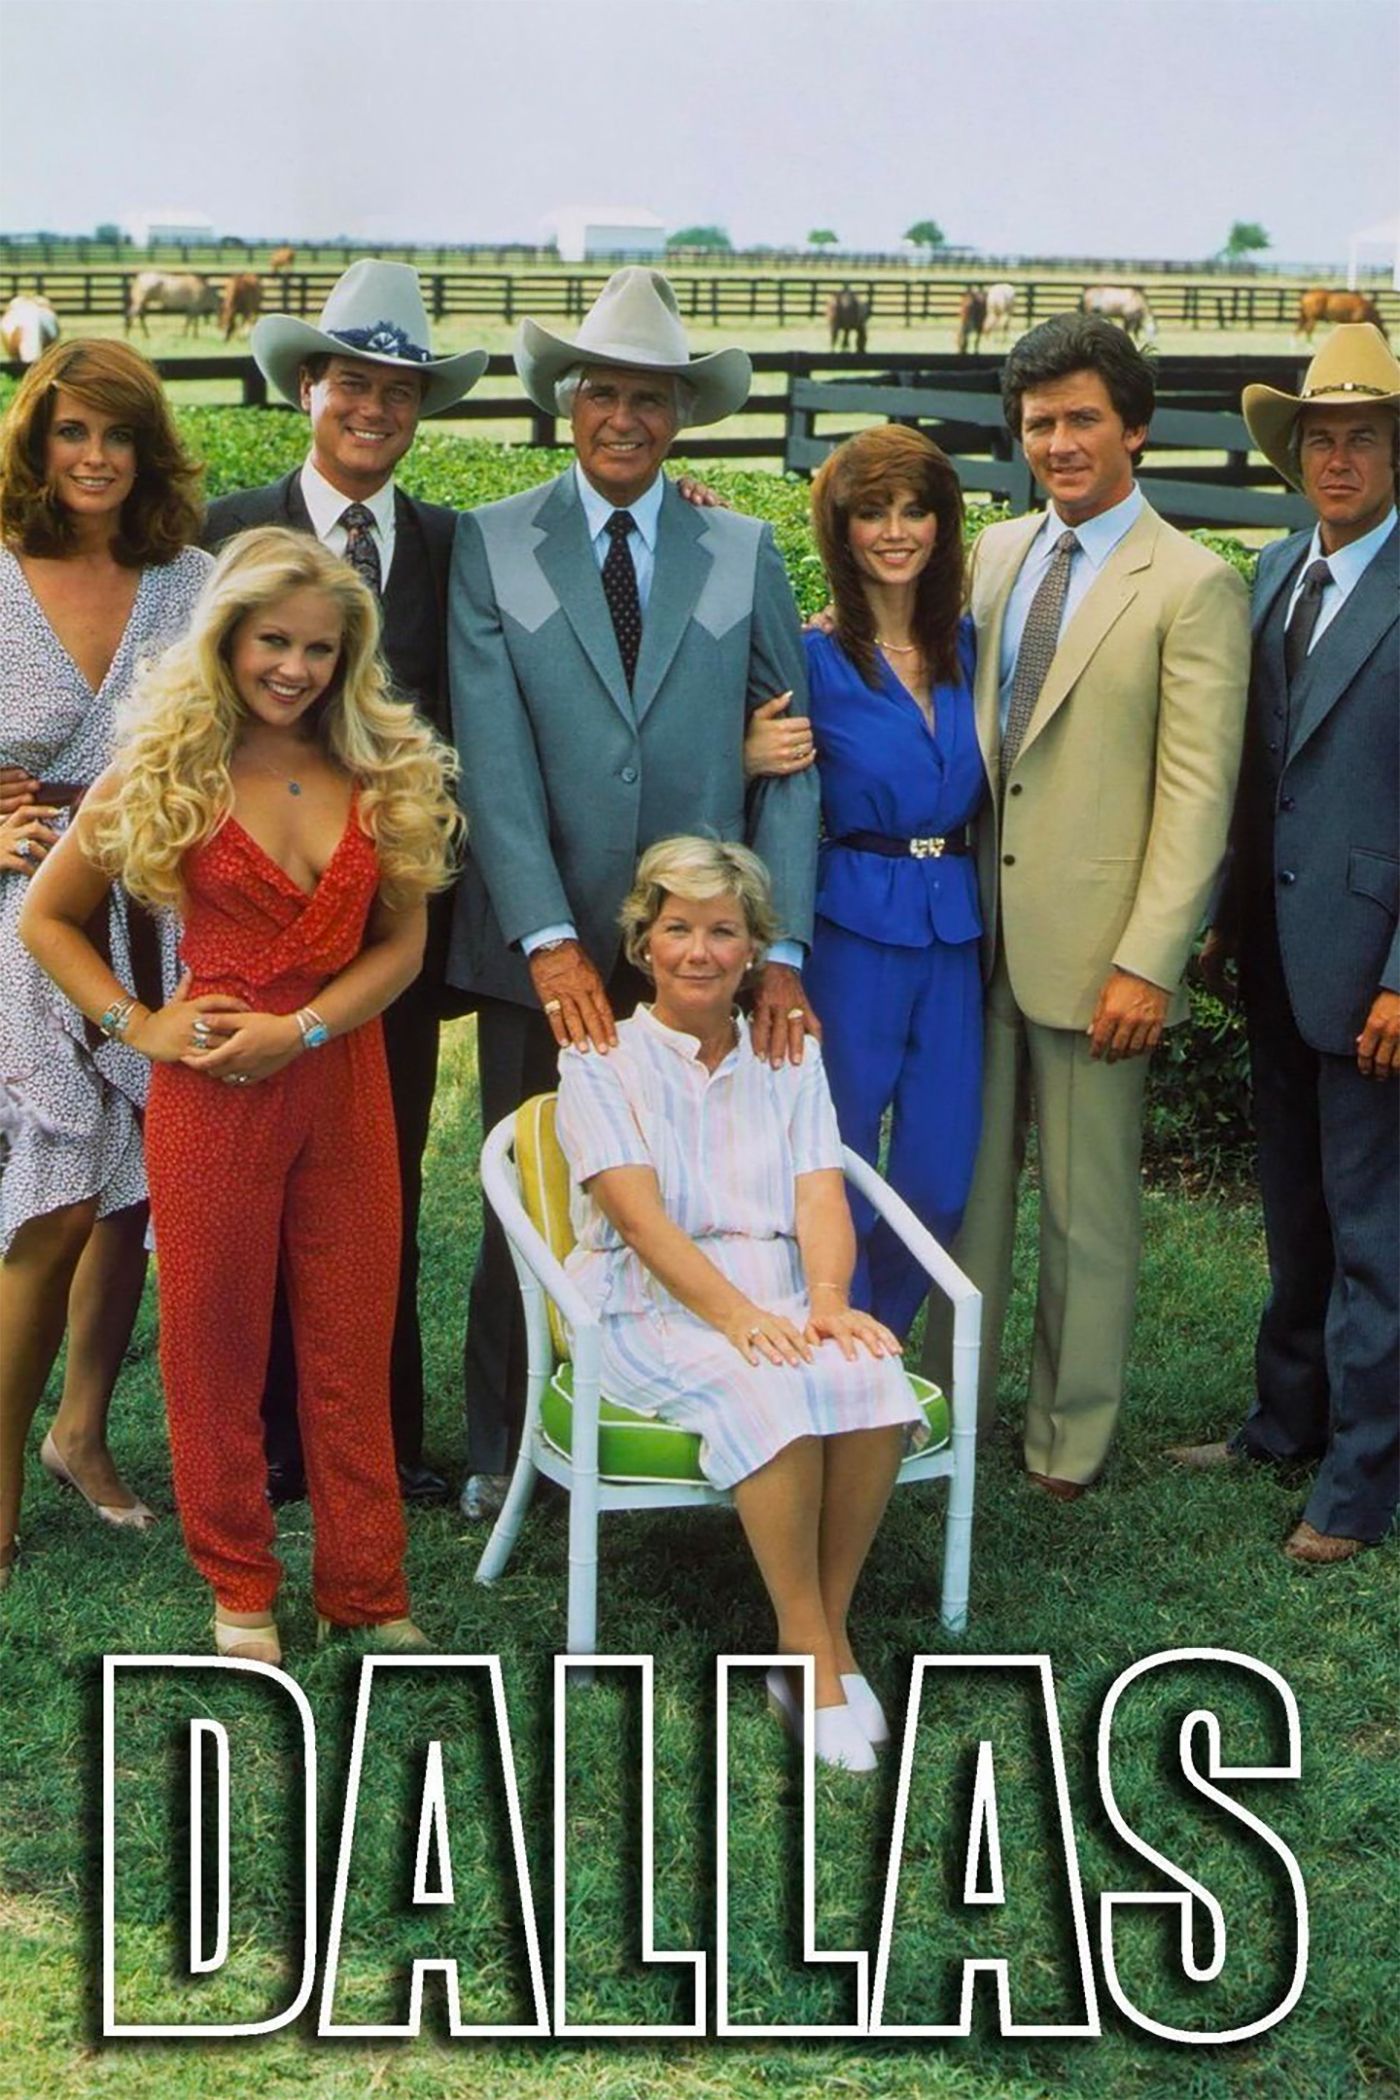 1978's Dallas poster with the Ewing family